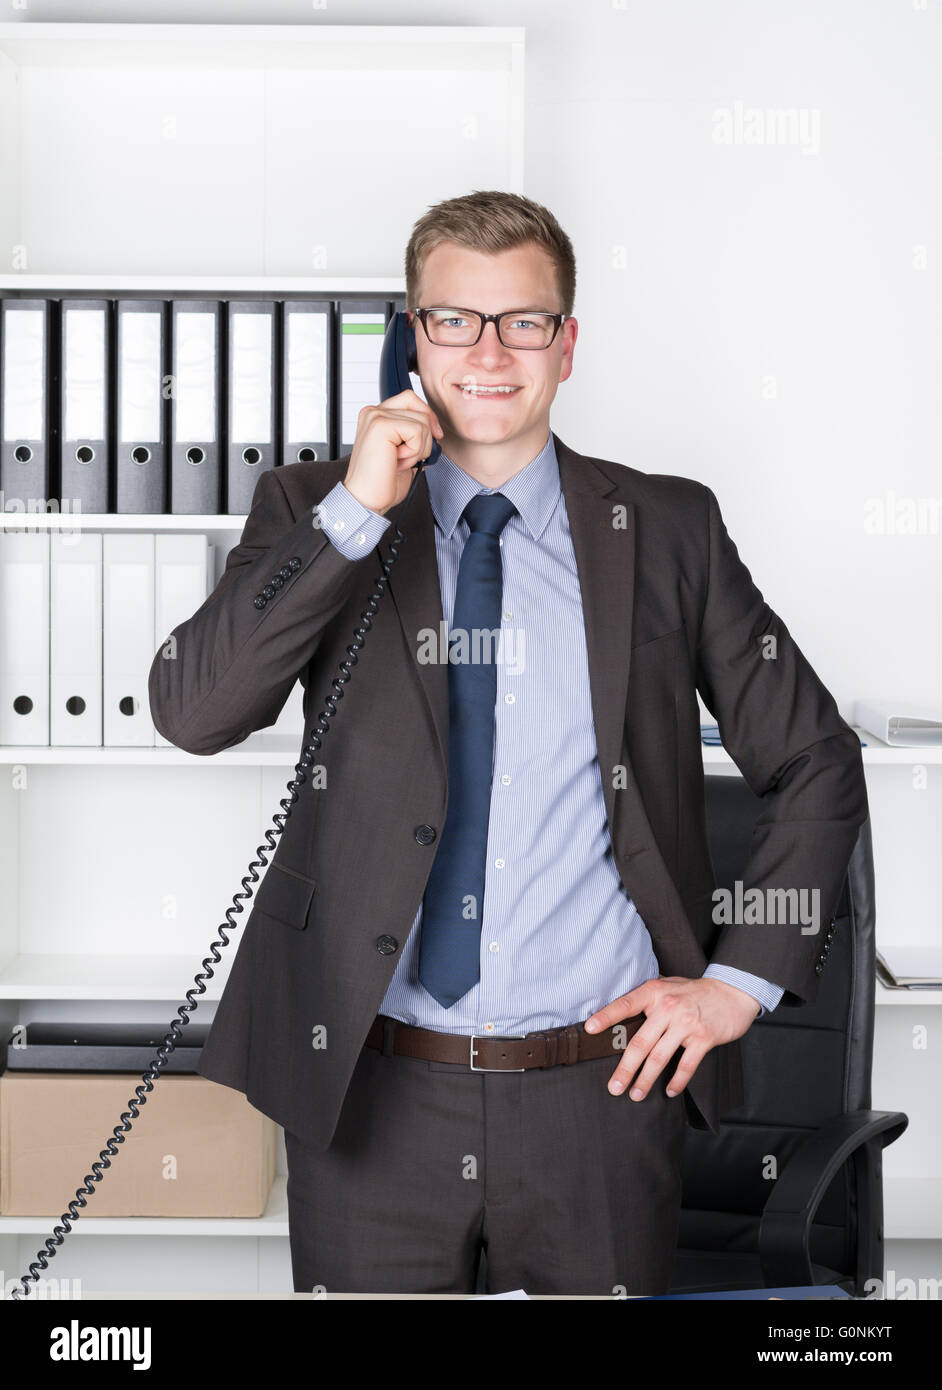 Young smiling businessman with glasses is phoning while standing at the desk in the office. A shelf is in the background. The ma Stock Photo